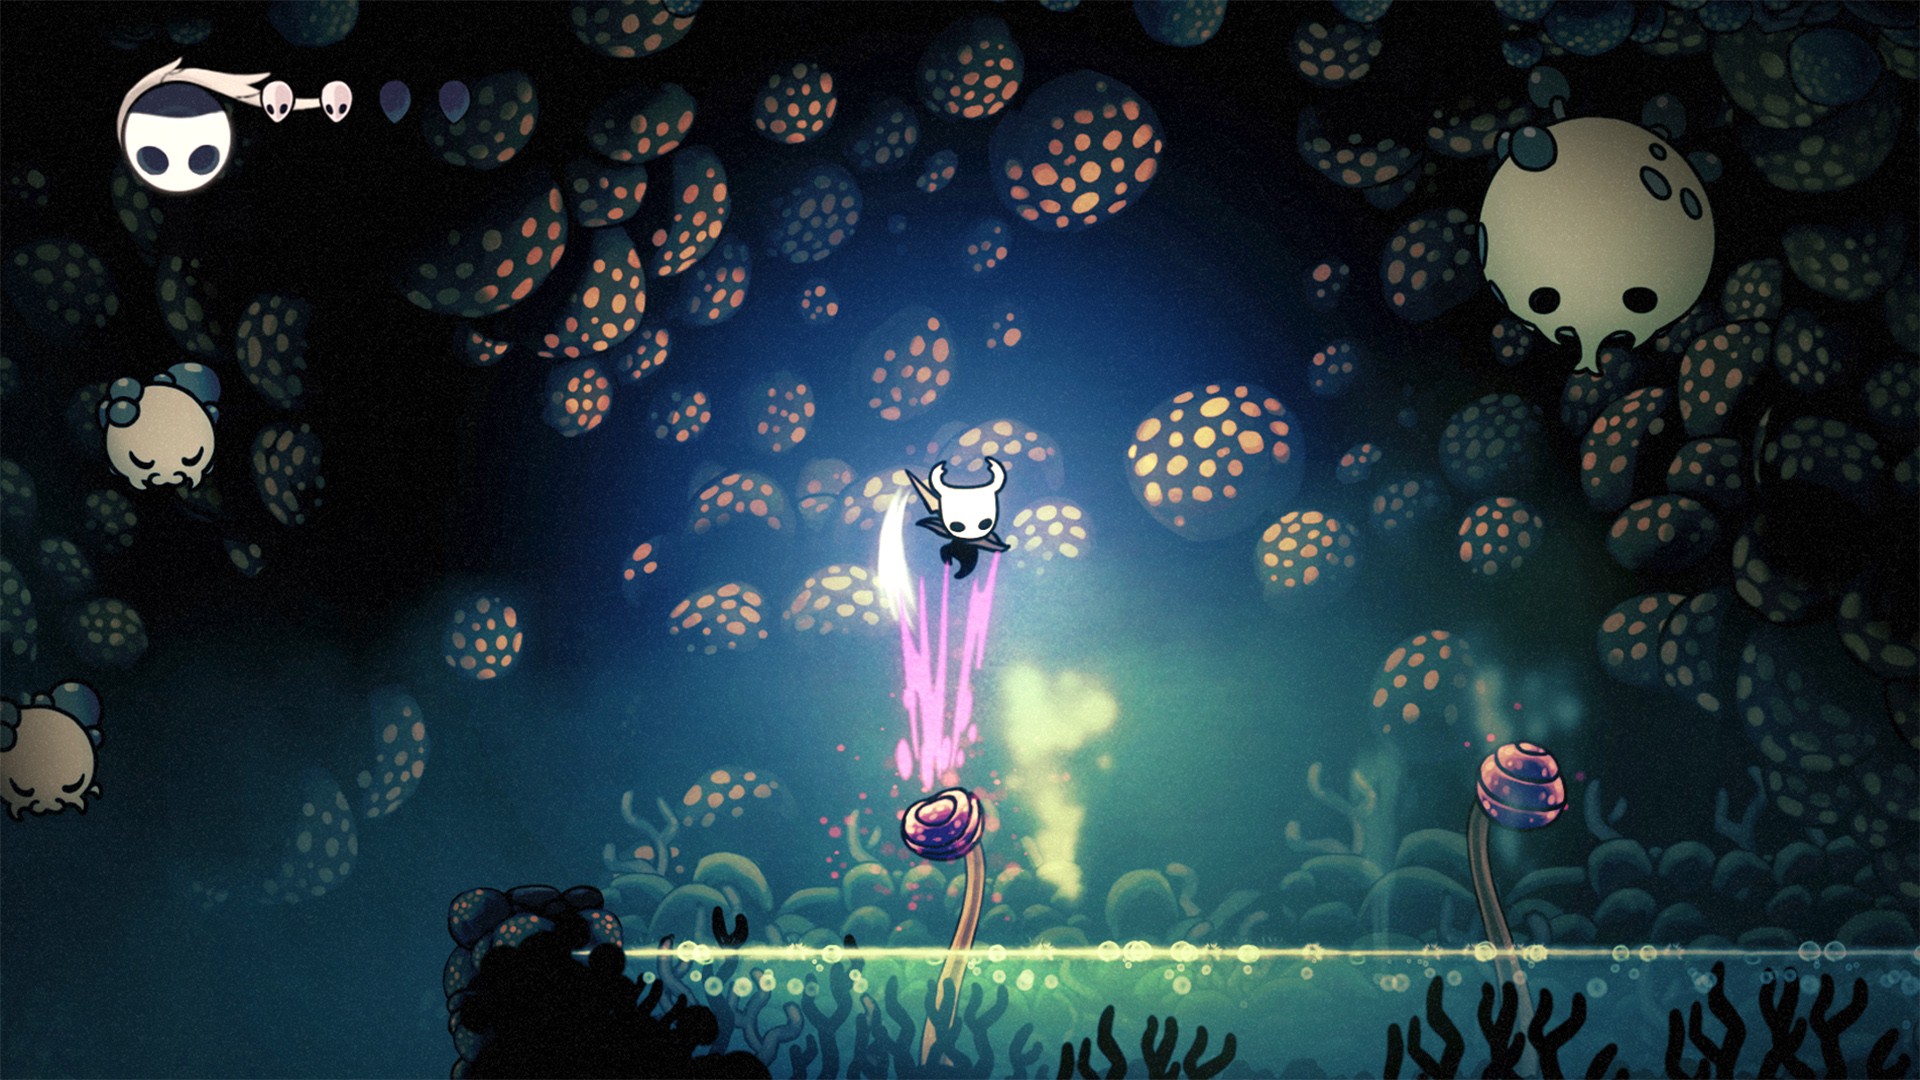 Wallpapers Computer Hollow Knight with high-resolution 1920x1080 pixel. You can use this wallpaper for your Desktop Computer Backgrounds, Mac Wallpapers, Android Lock screen or iPhone Screensavers and another smartphone device